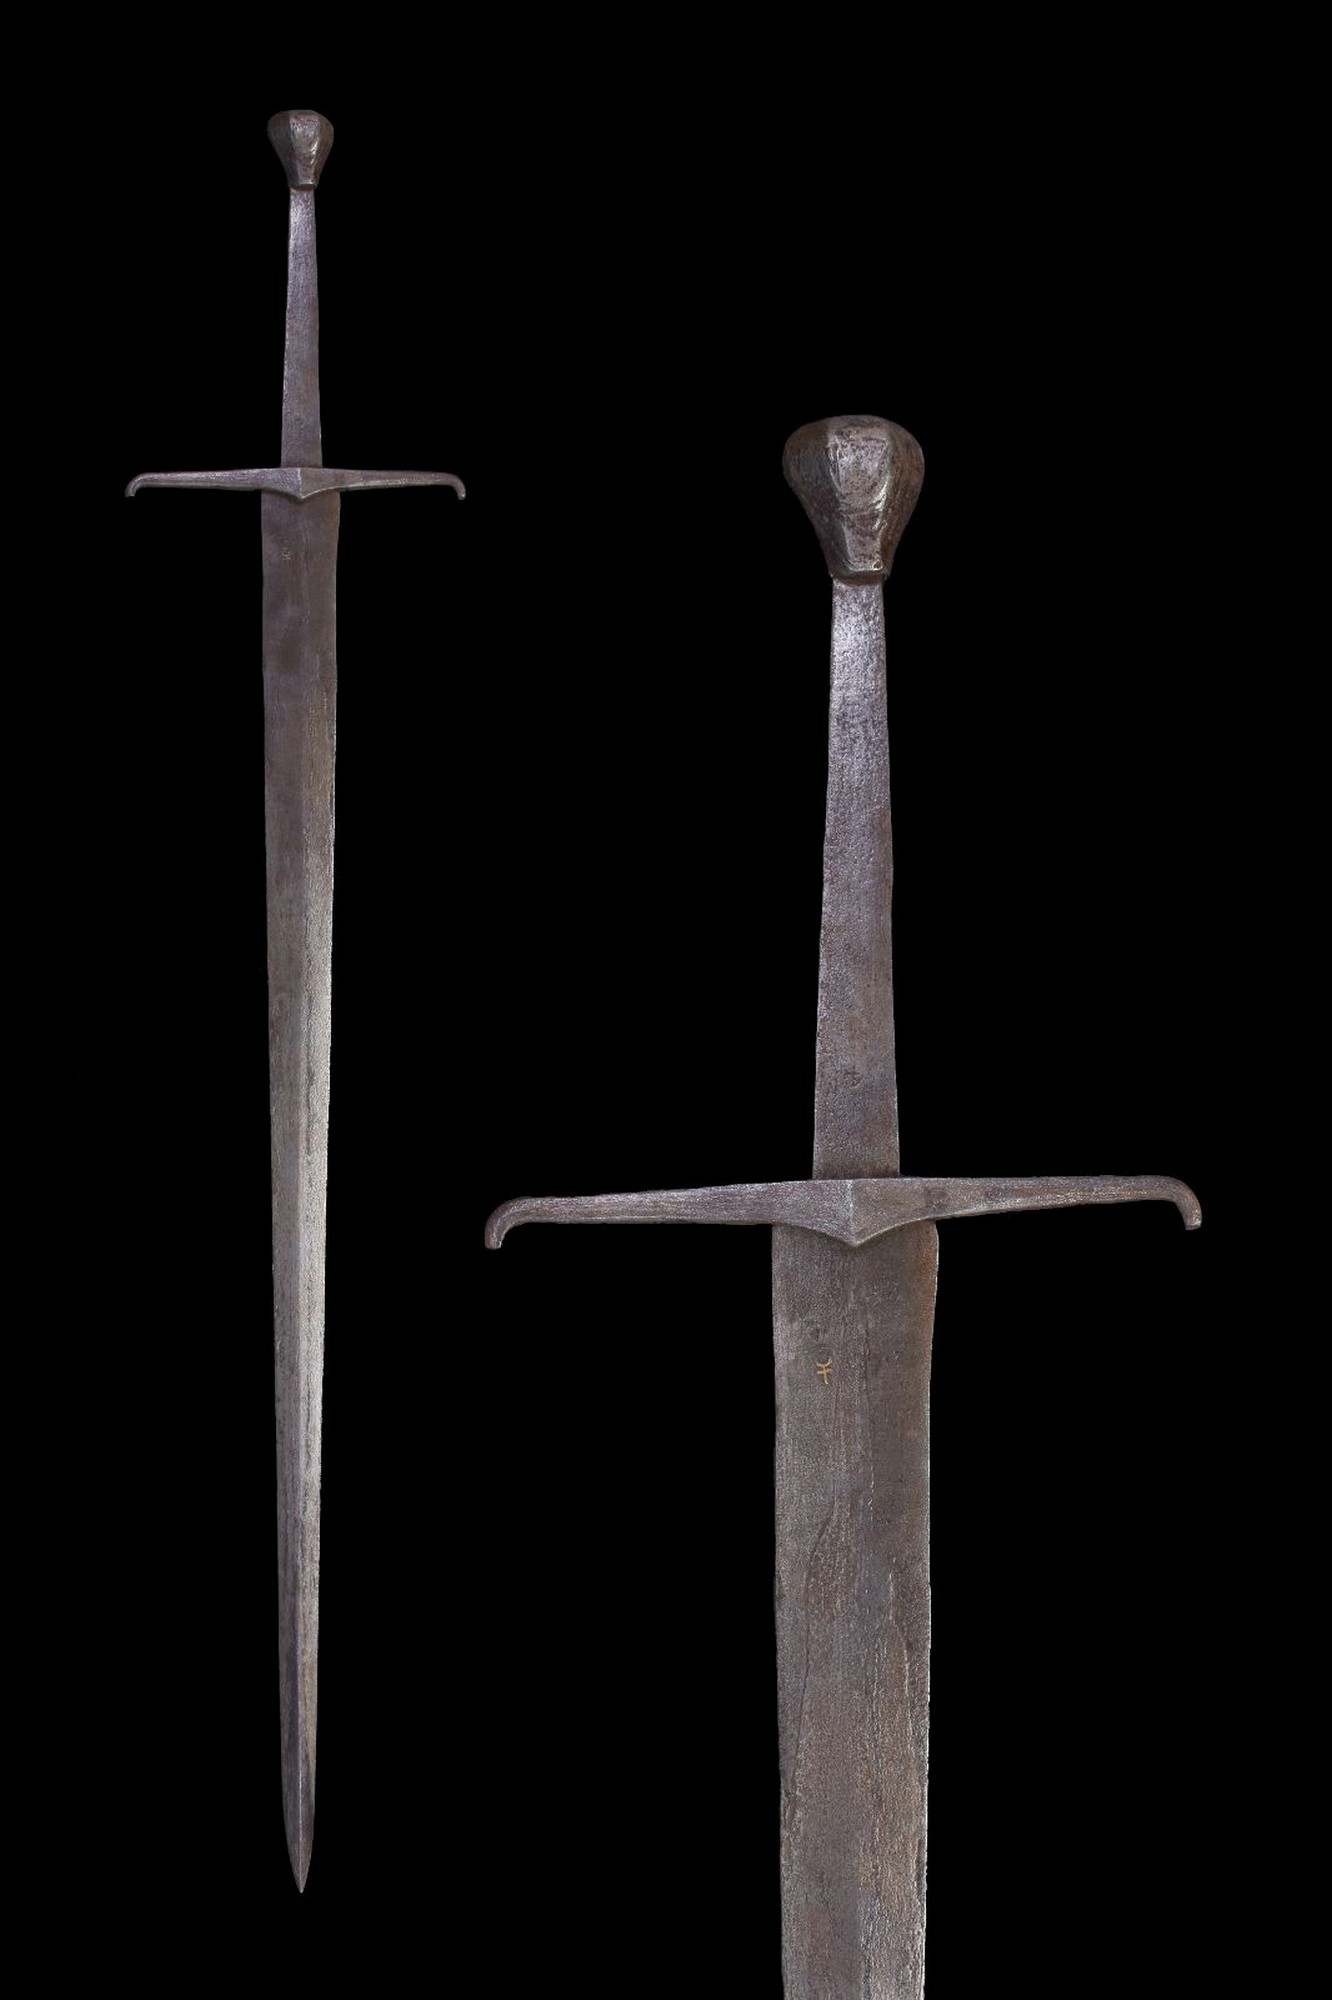 RARE 15th C. EPEE IRON SWORD WITH REPORT